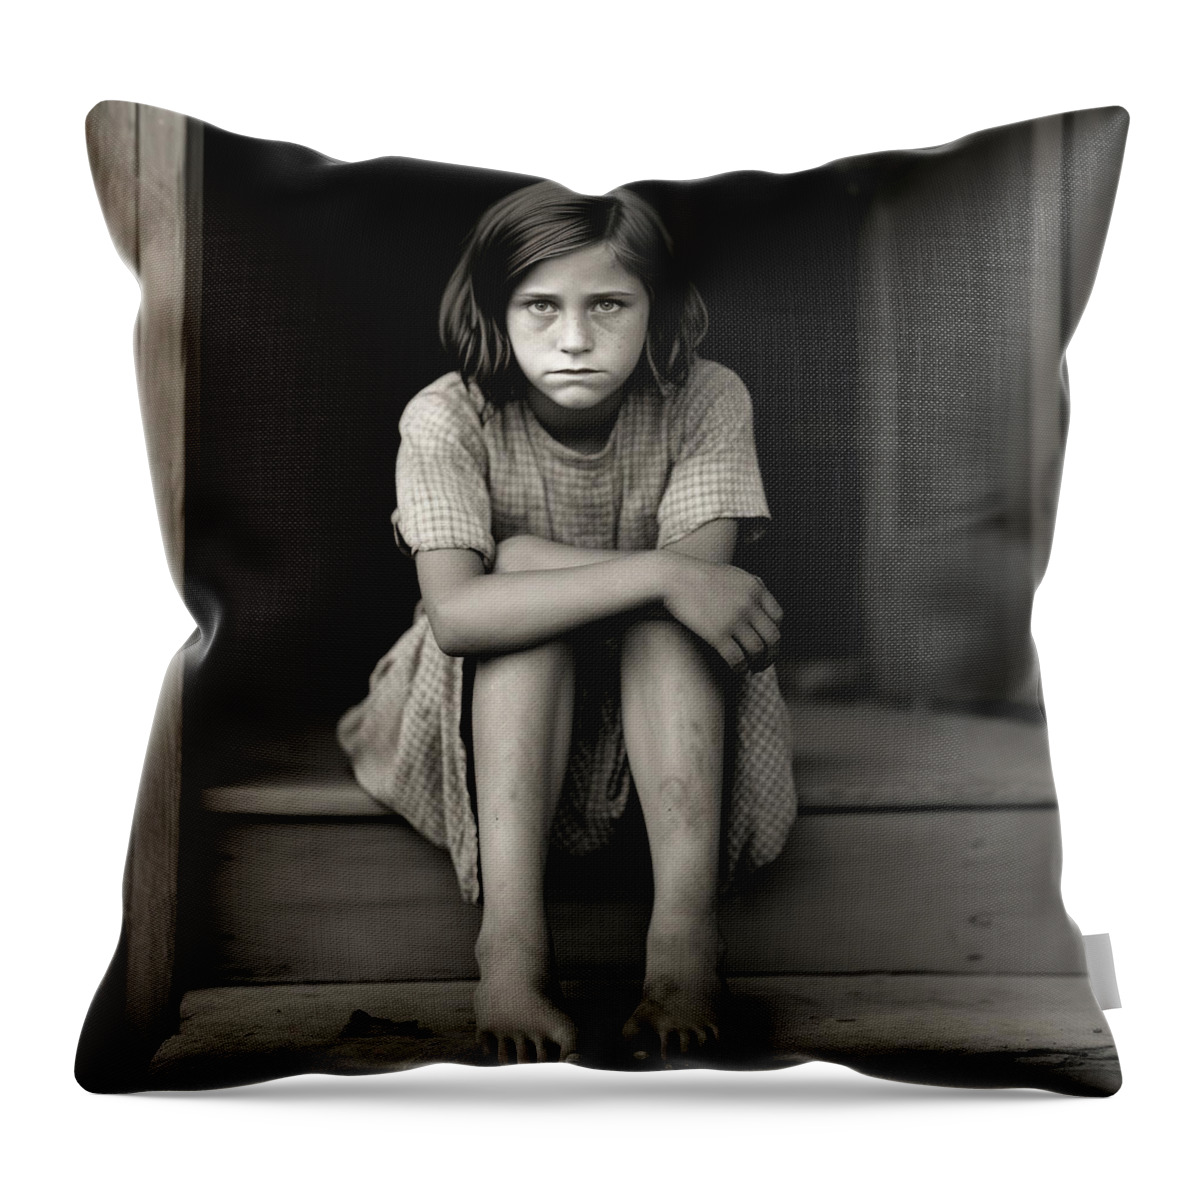  Girl Throw Pillow featuring the photograph The Great Depression No.9 by My Head Cinema